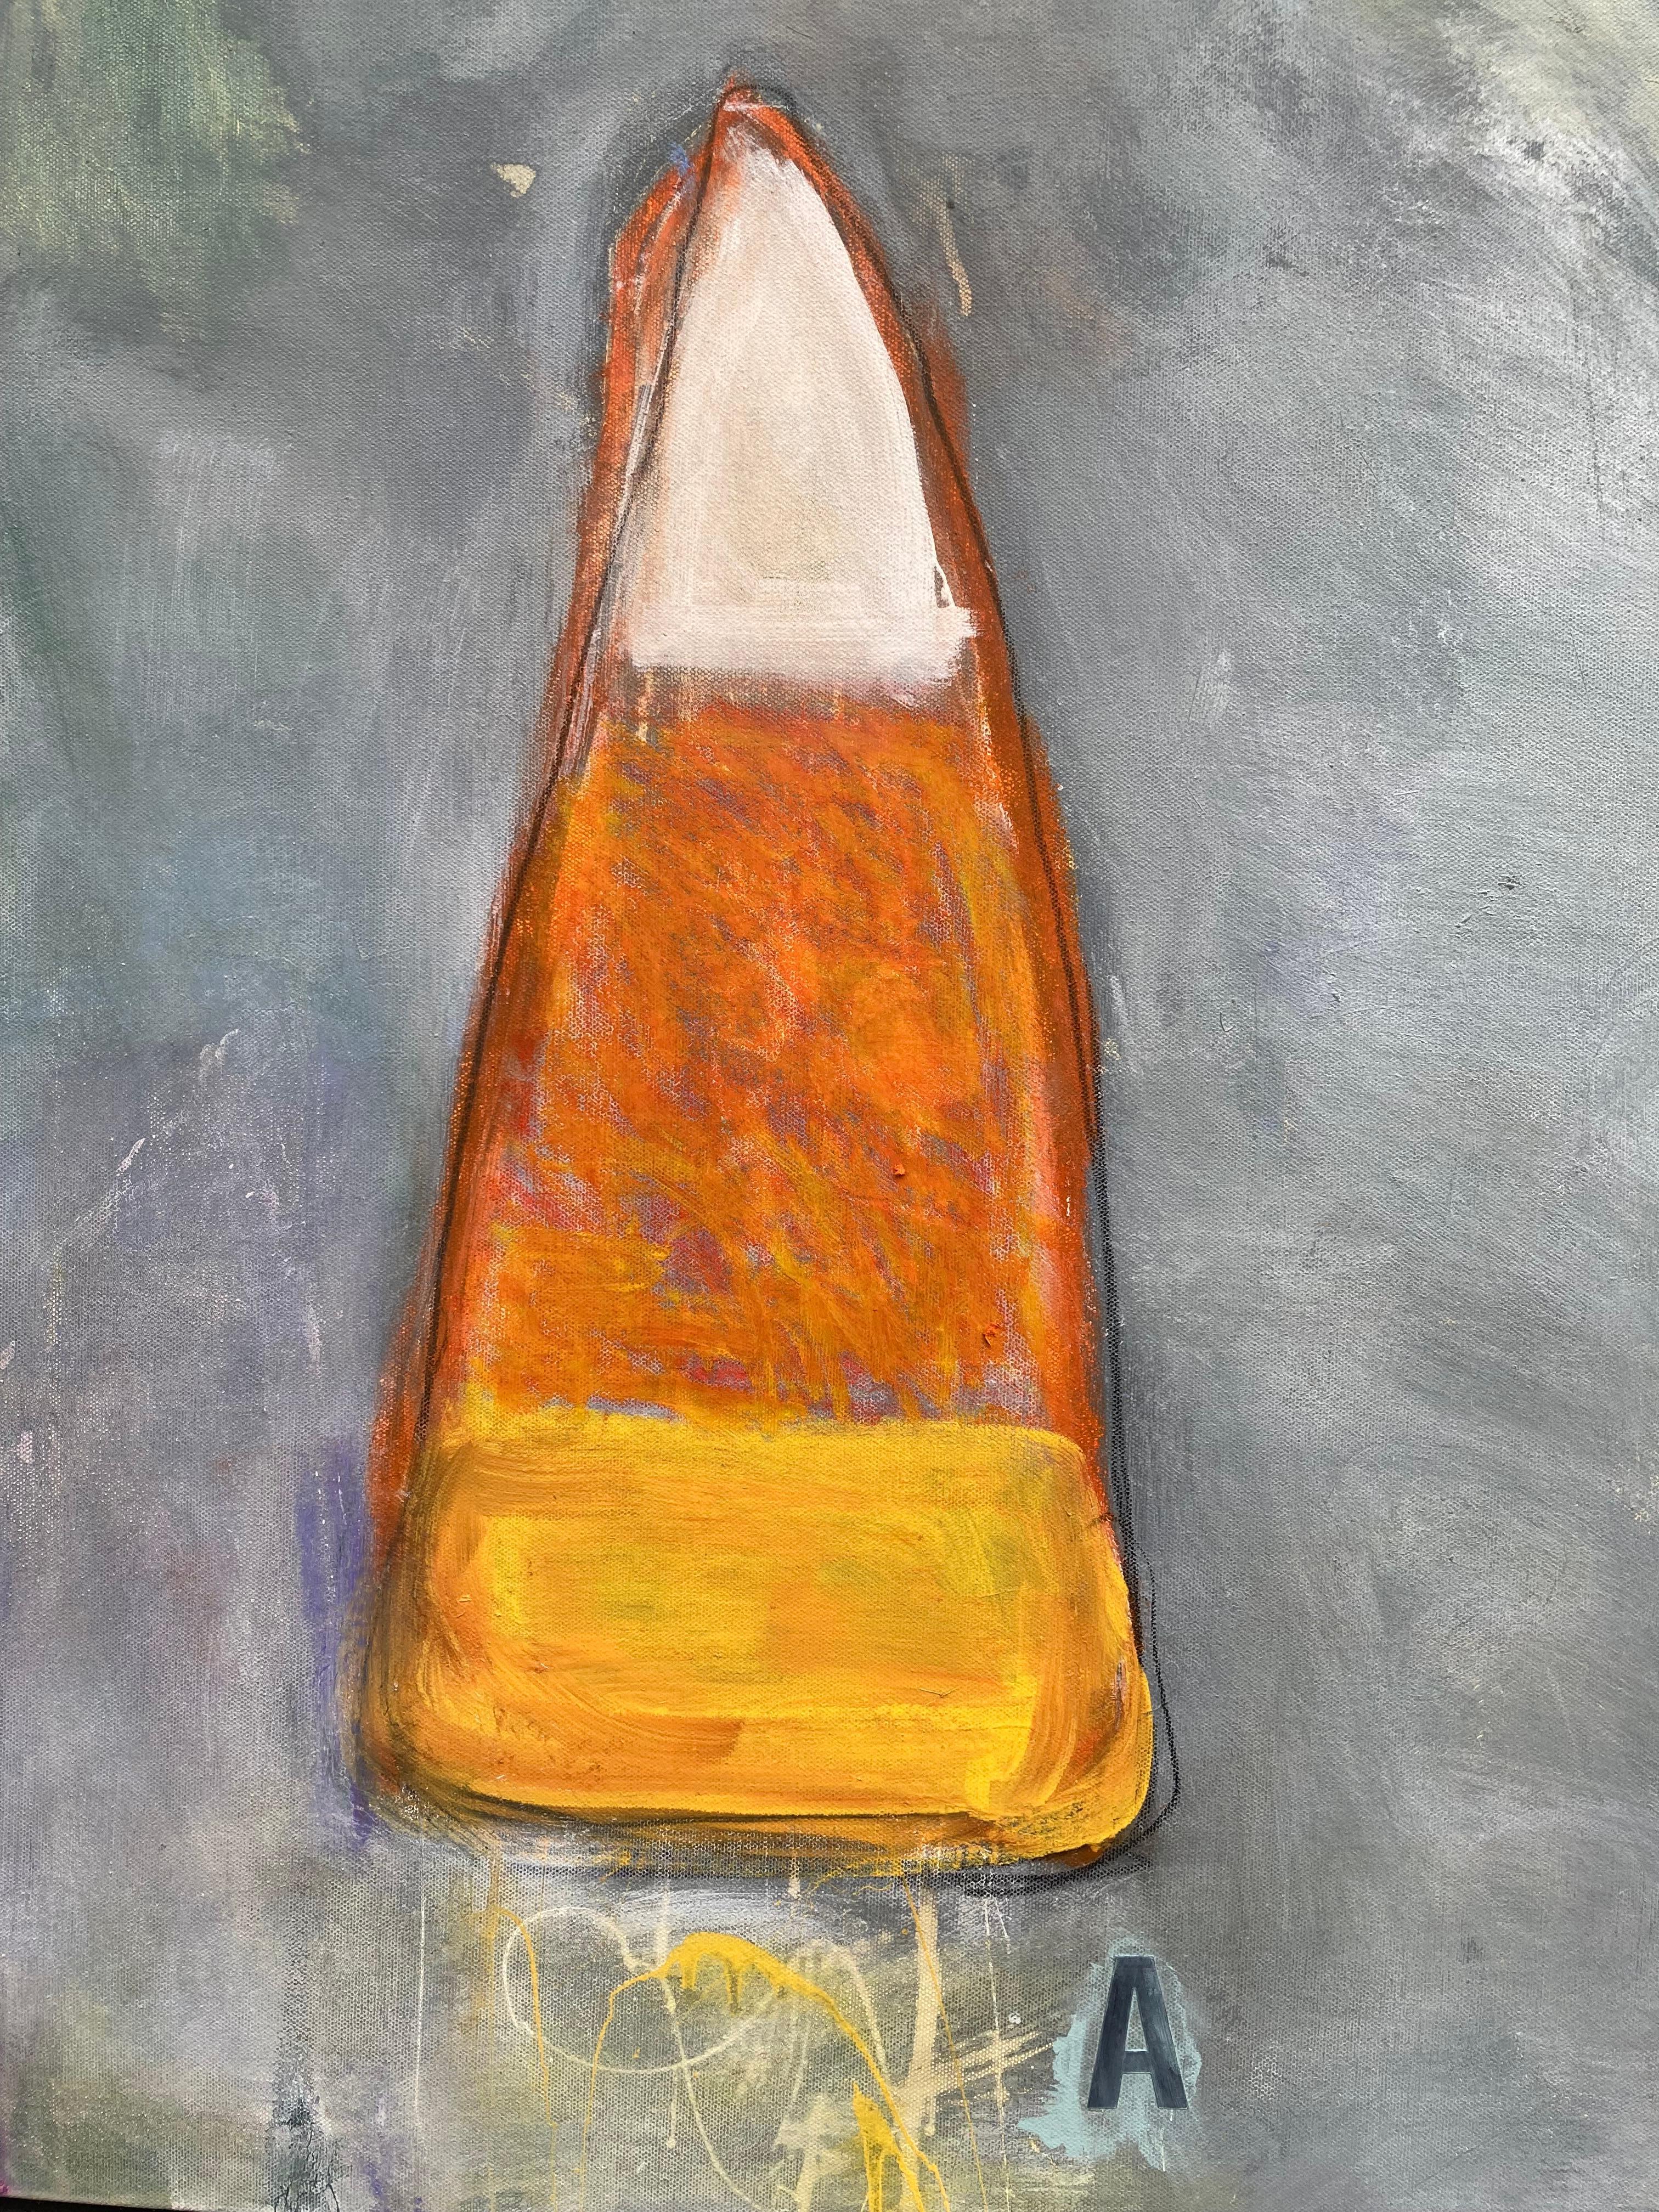 The Philosopher Classifies Candy Corn (Large) - Painting by Guy Lyman